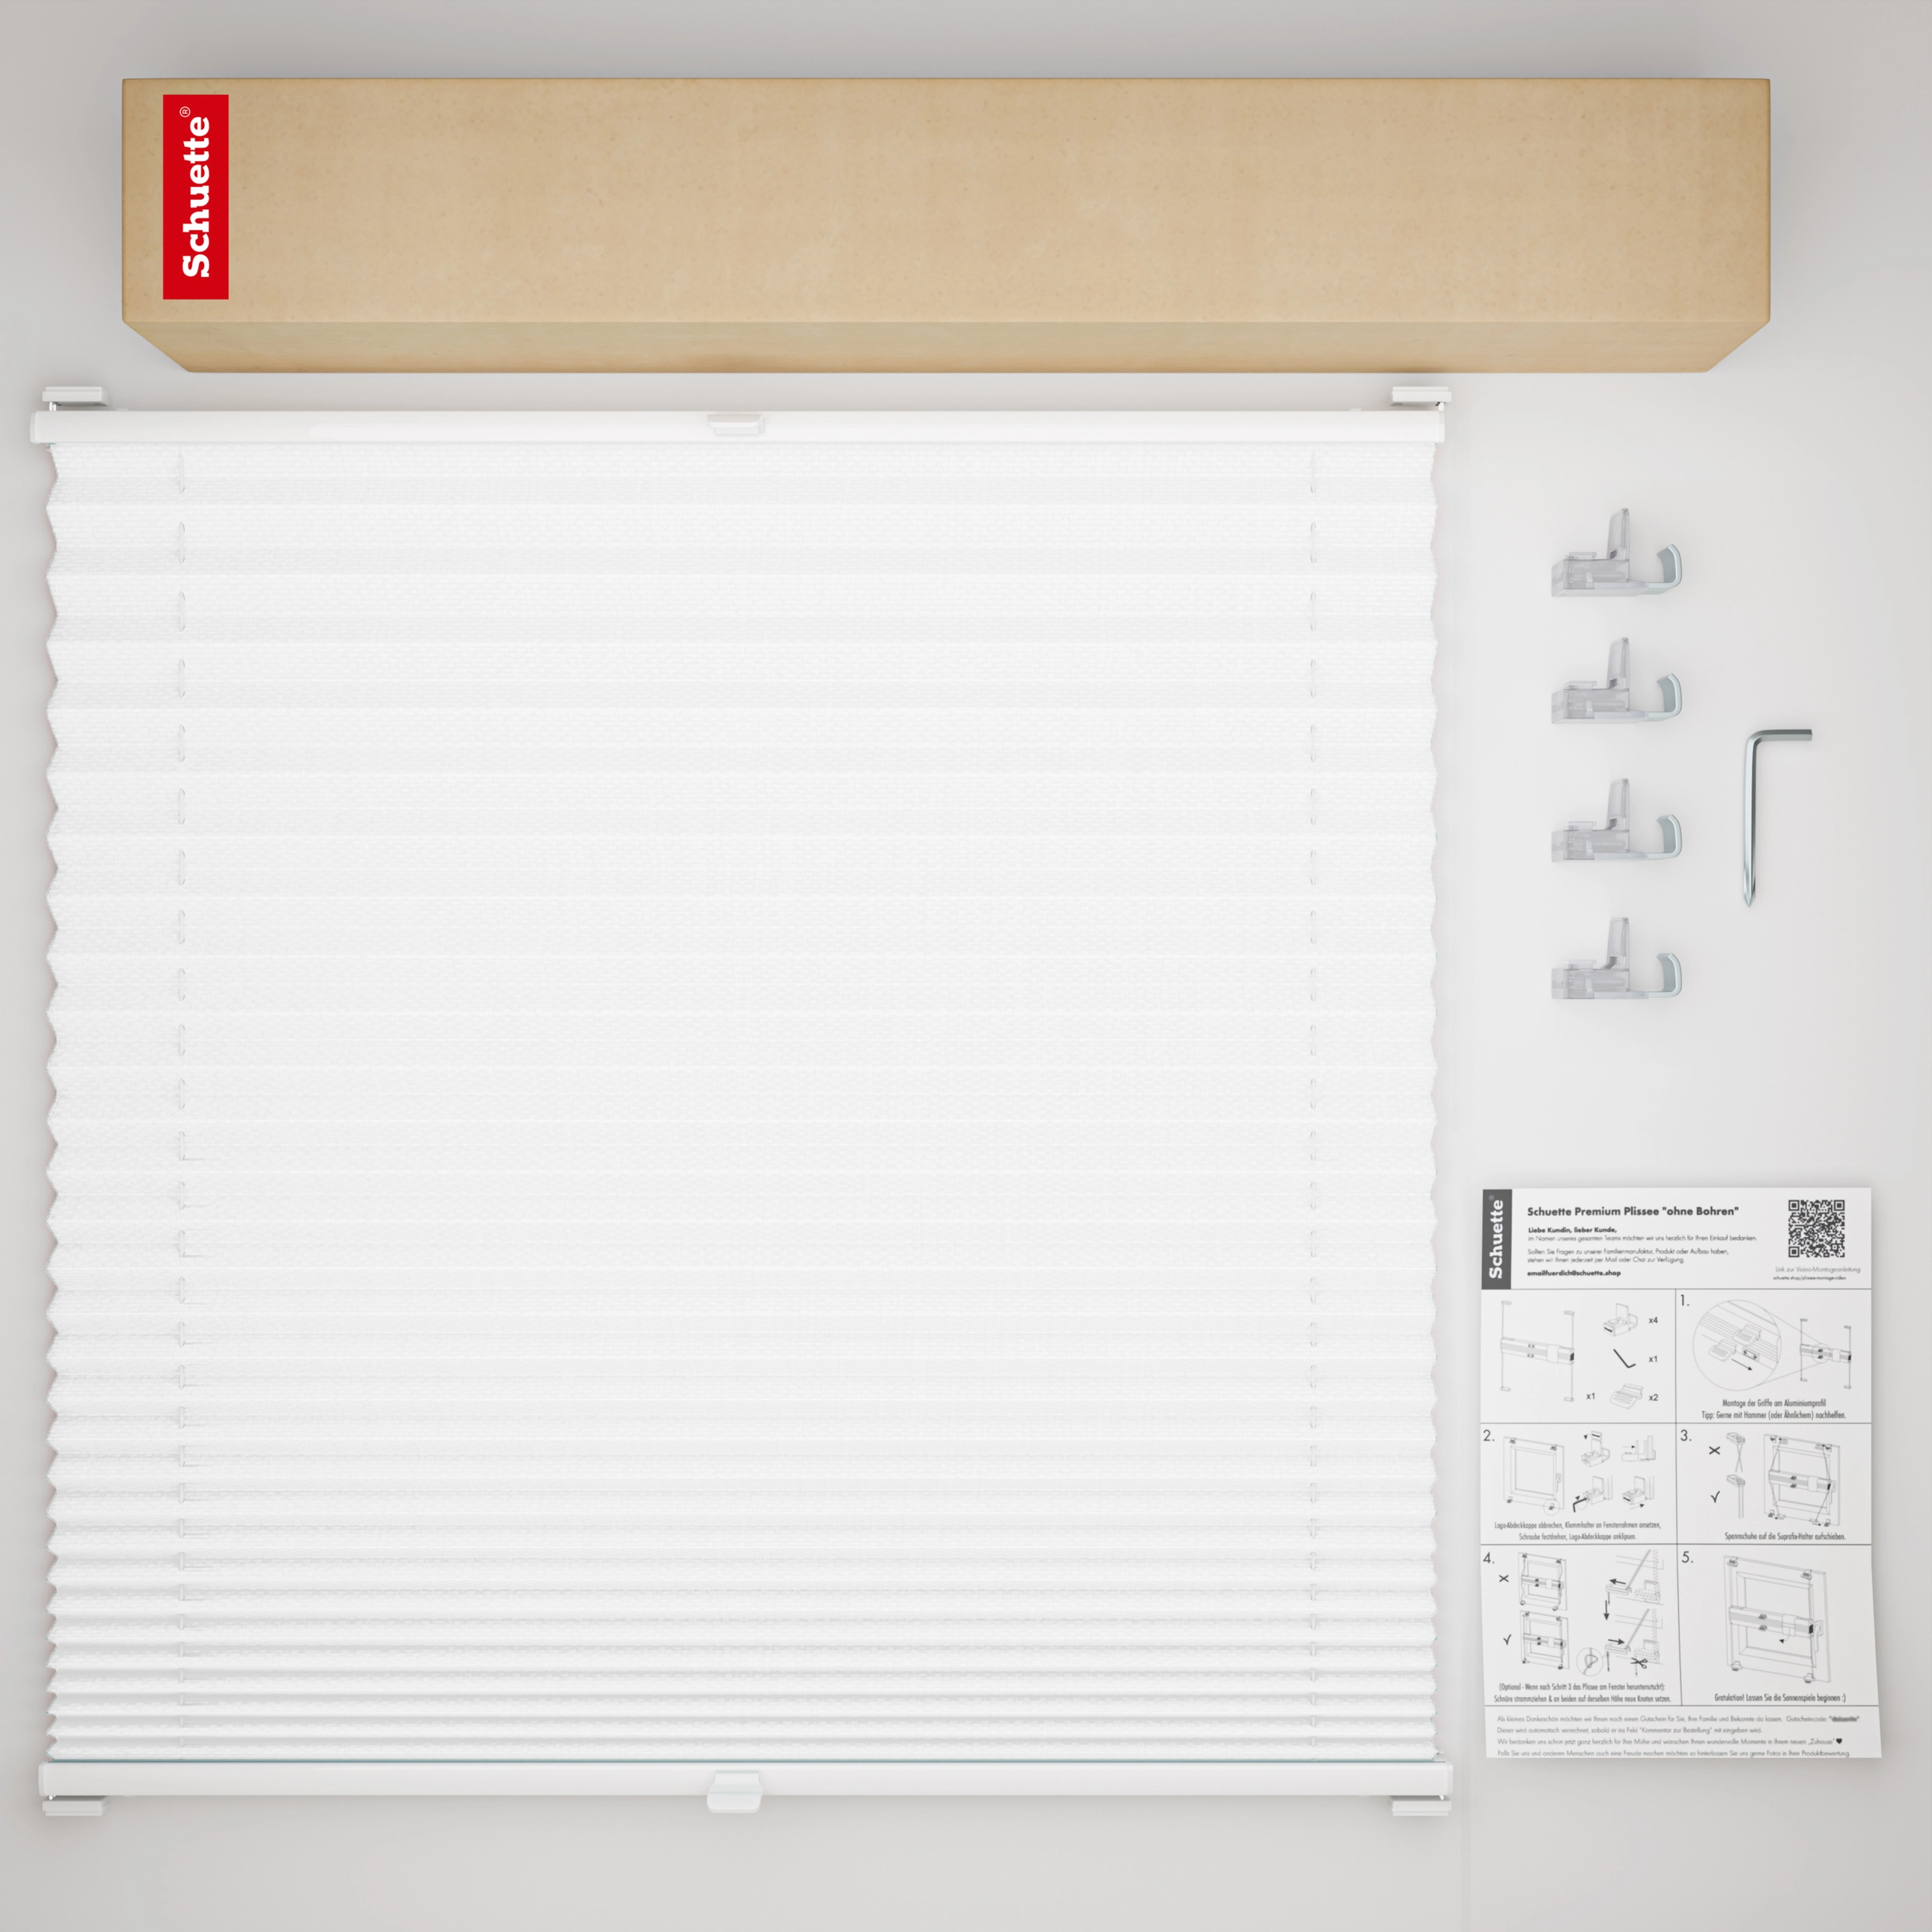 Schuette® Pleated Blind Made to Measure without Drilling • Thermo Collection: White Day (White) • Profile Colour: White